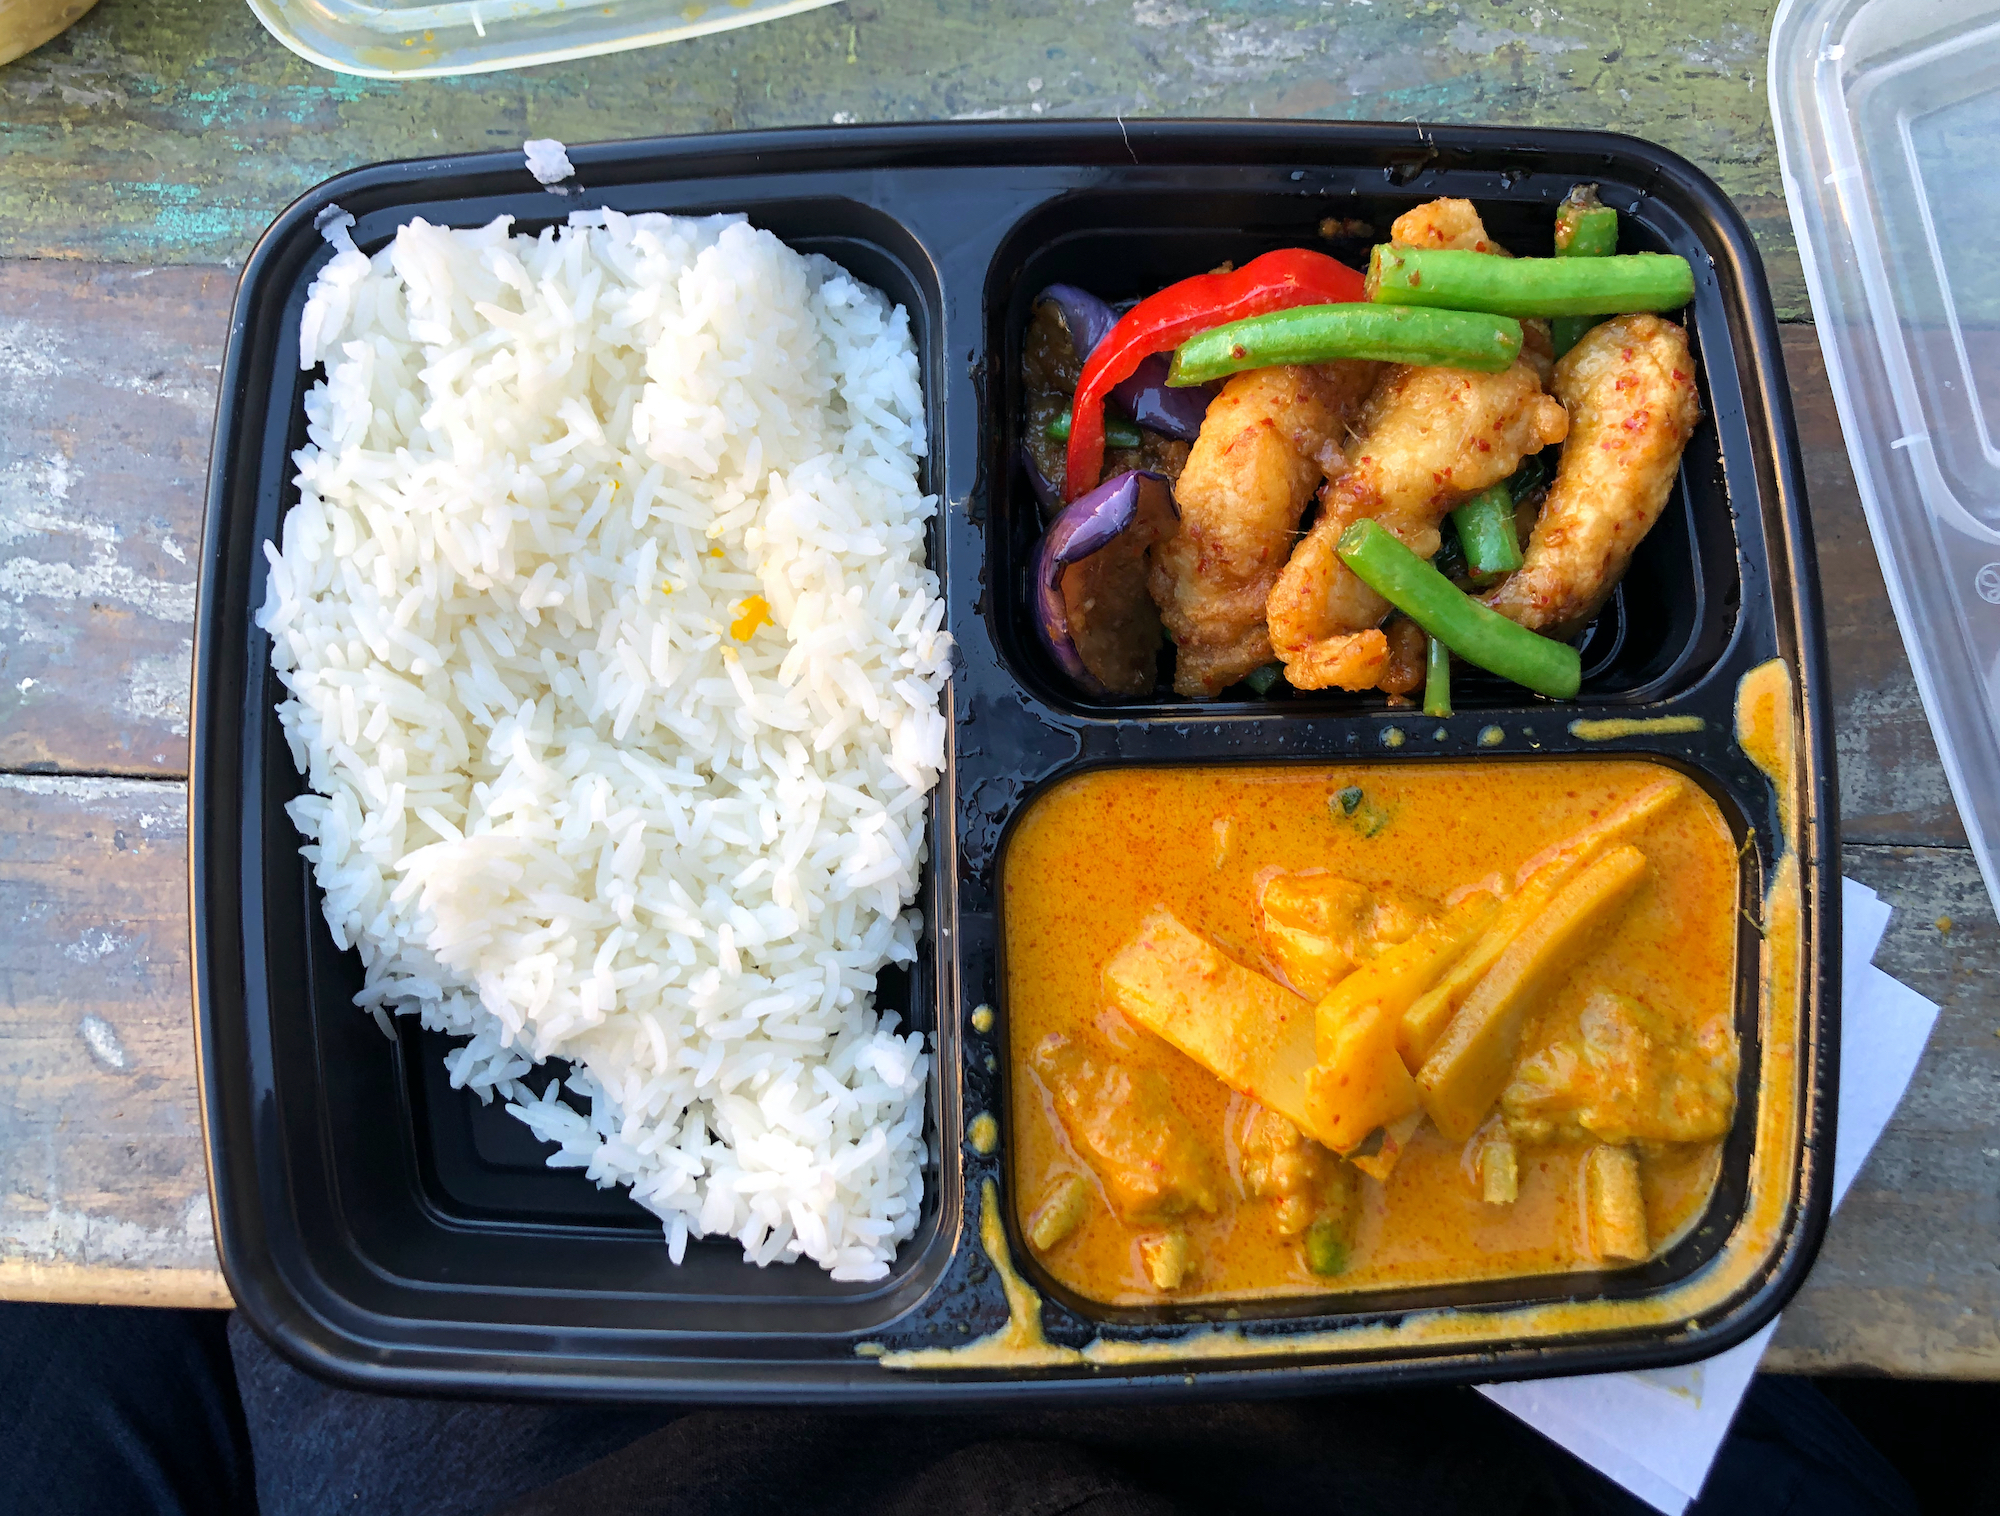 Khao Kang Take out meal with curry, chicken and rice